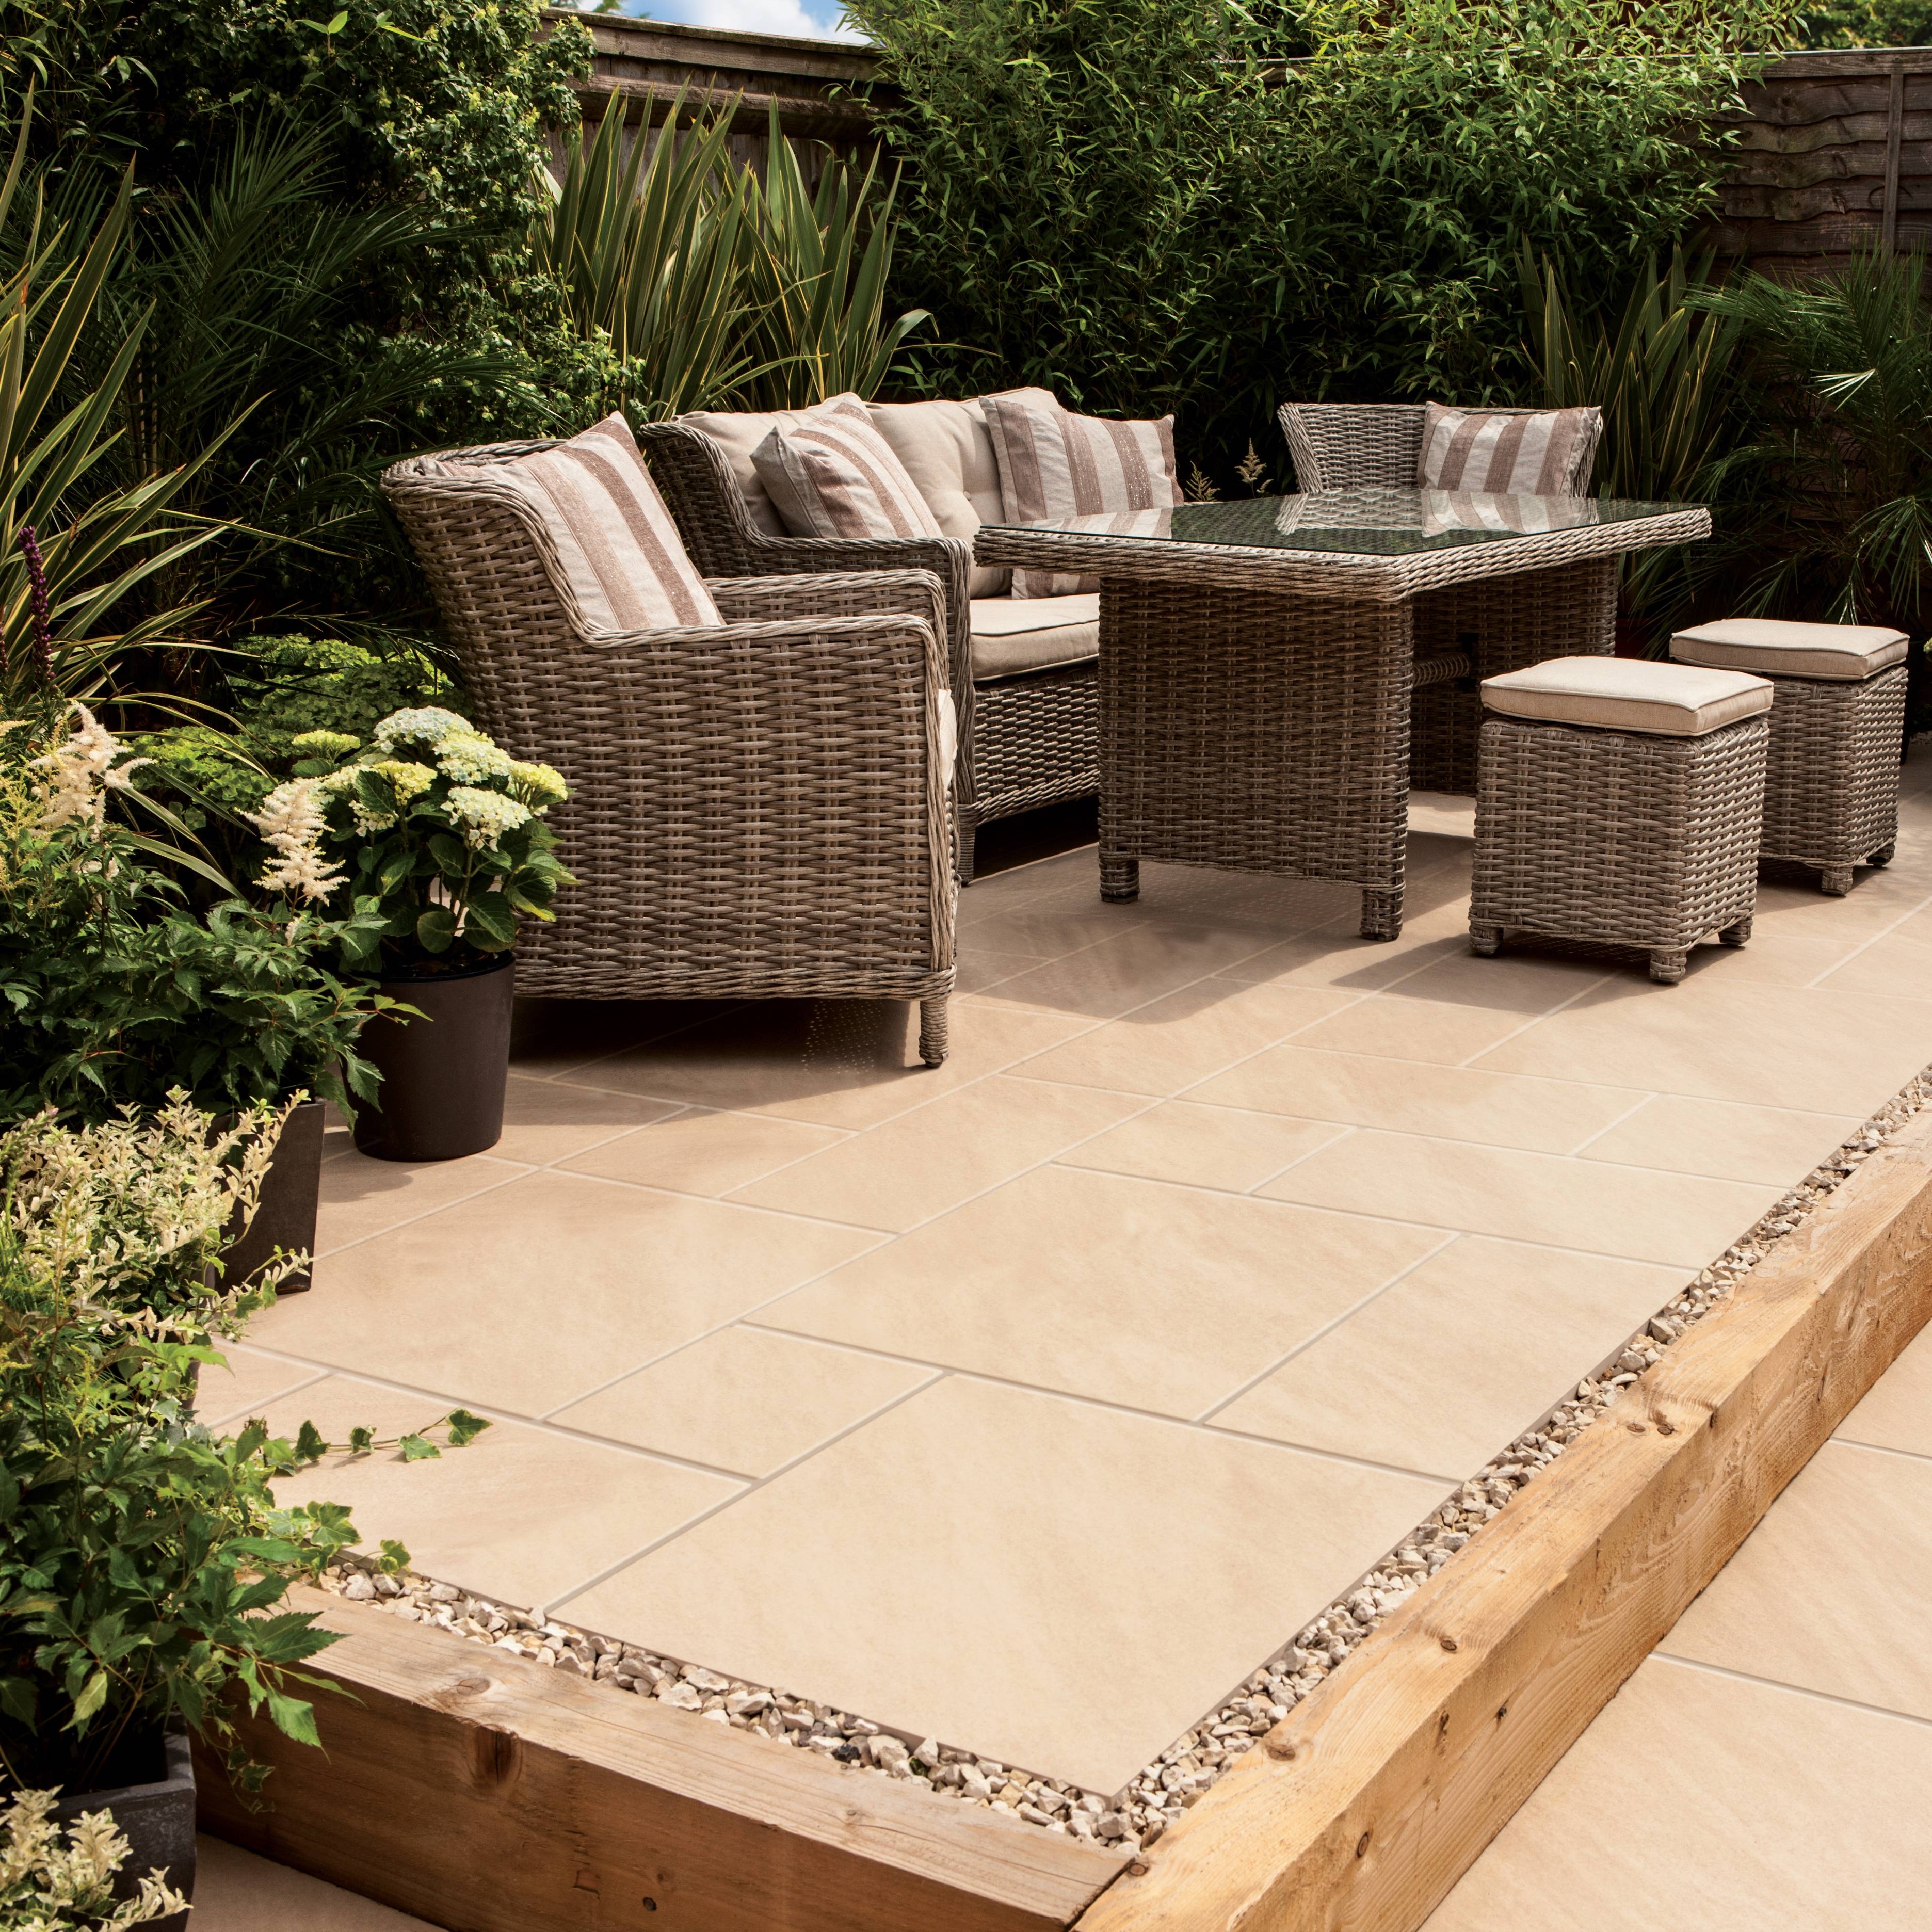 Bradstone Aspero Porcelain Paving is a ultra modern,strong and durable product. It is available in a 3 size patio pack for a randomised ,natural appearance. The Beige shade shown is perfect if you are looking for a warm buff tone with a consistent finish that wont fade!